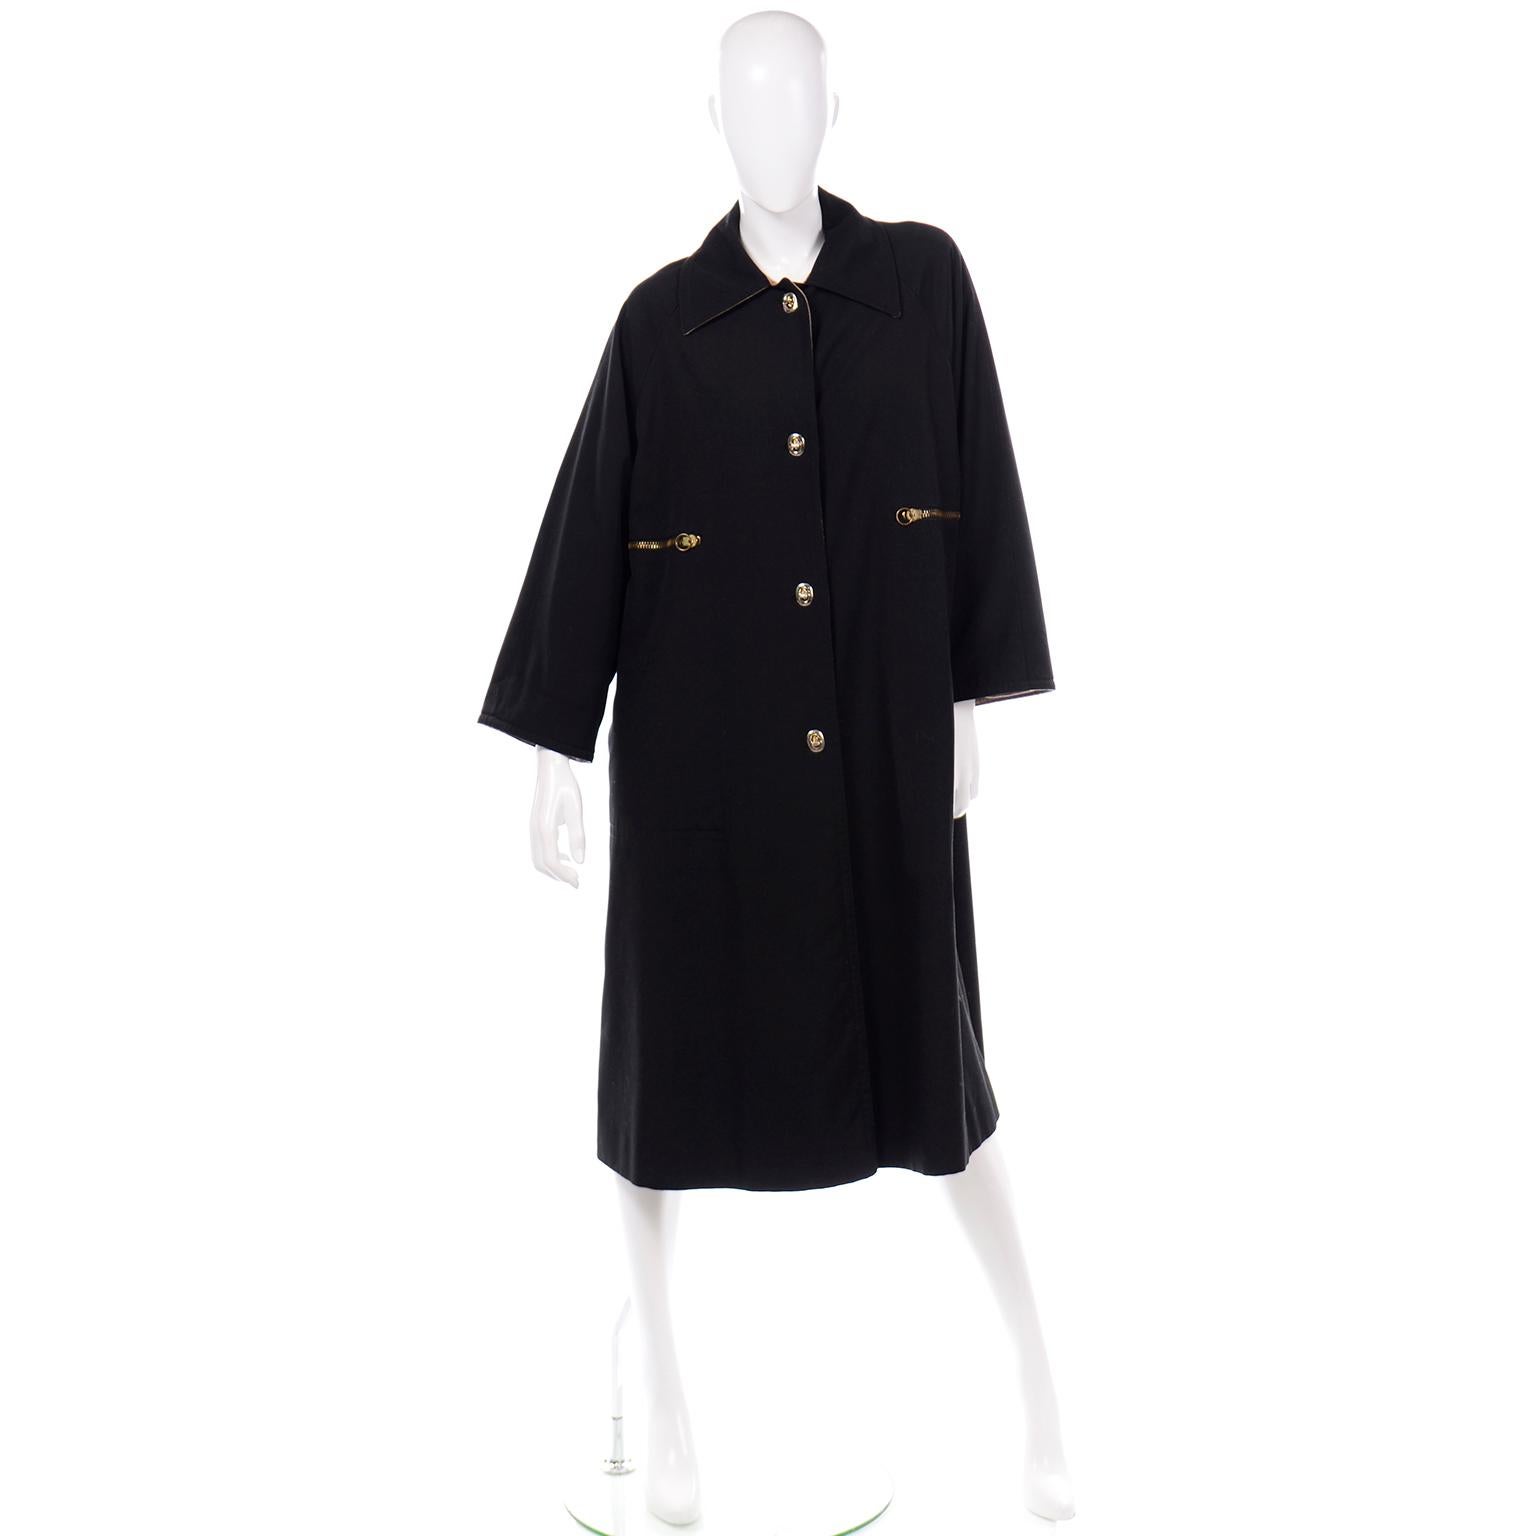 We love vintage Bonnie Cashin clothing and we have sold hundreds of her pieces over the years. Her raincoats always stand the test of time, and this vintage Bonnie Cashin coat would be such a great one to add to your wardrobe! This great black coat